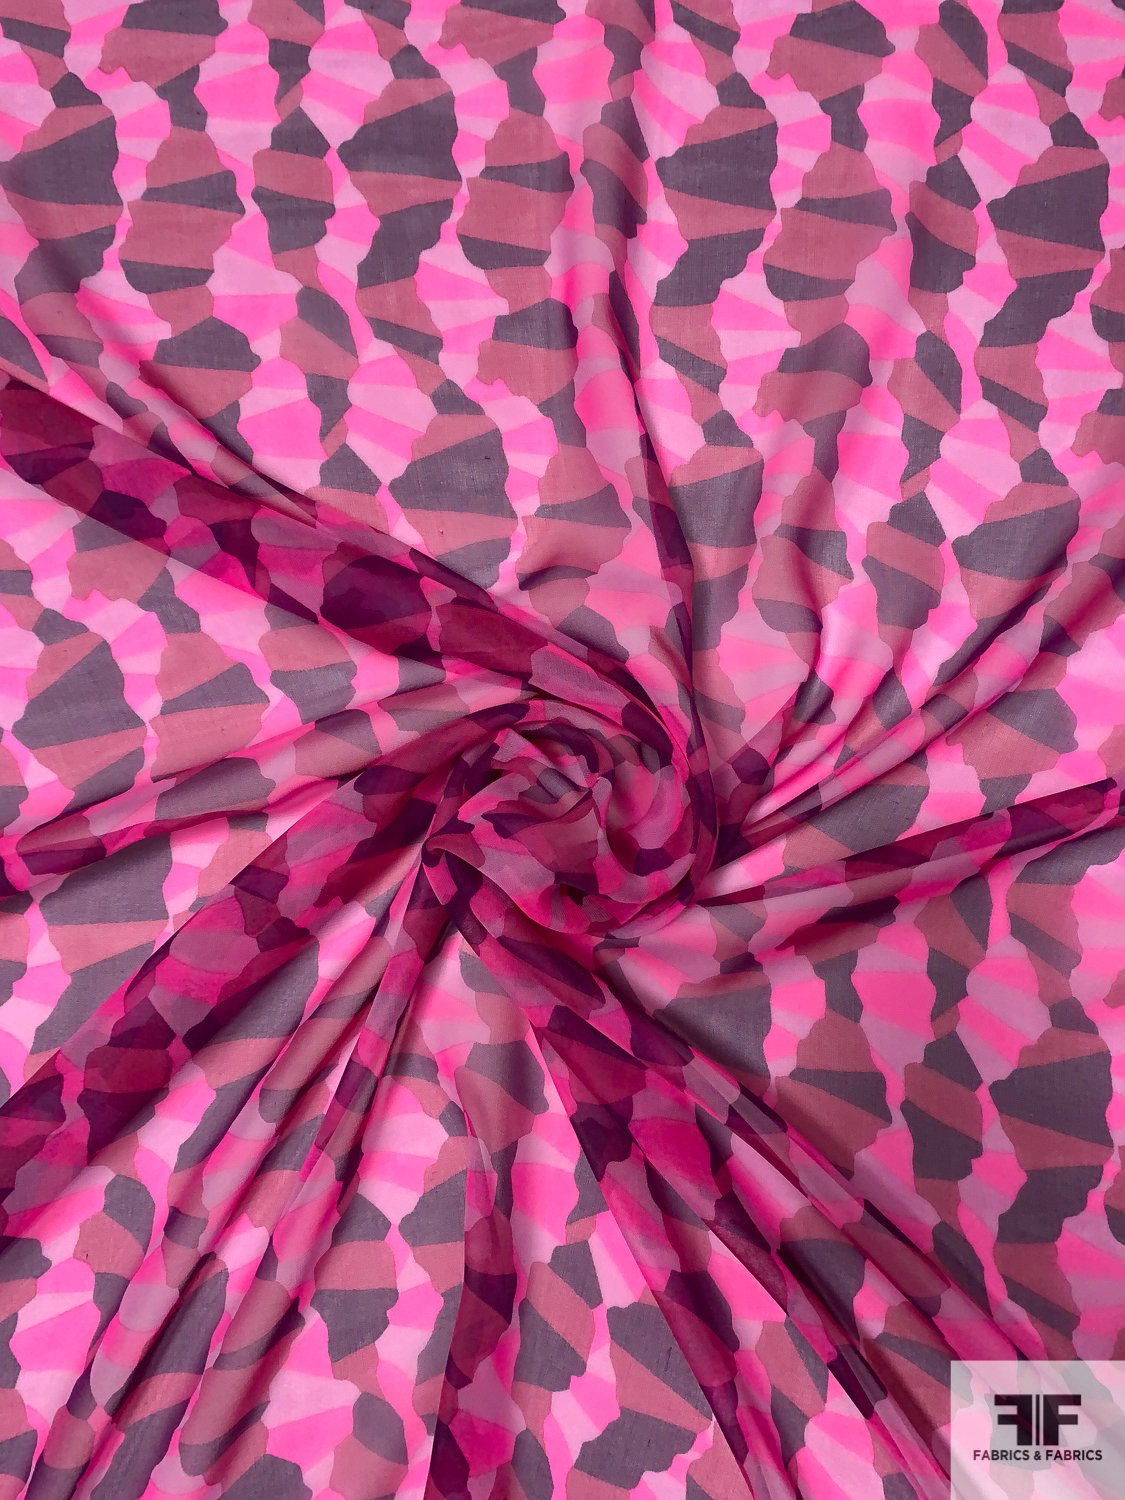 Abstract Vertical Wavy Lines Printed Silk Chiffon - Hot Pink / Purple / Orchid / Berry